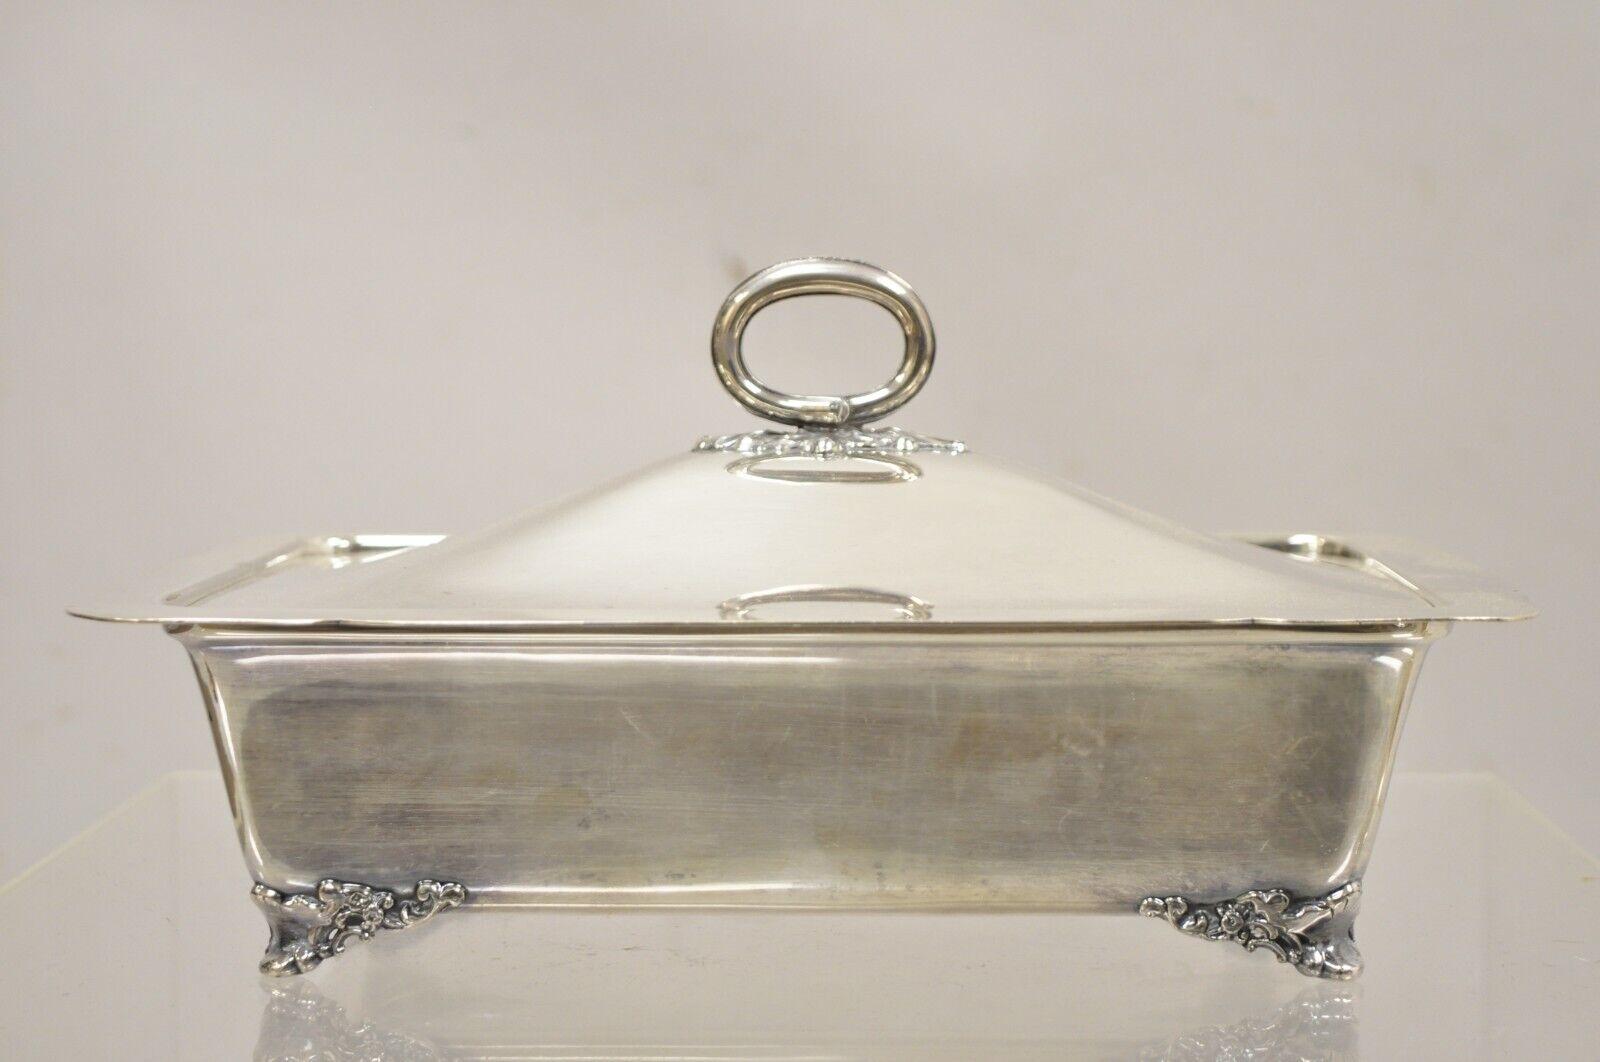 Vintage Reed & Barton Mayflower 5006 Silver Plated Covered Casserole Serving Dis In Good Condition For Sale In Philadelphia, PA